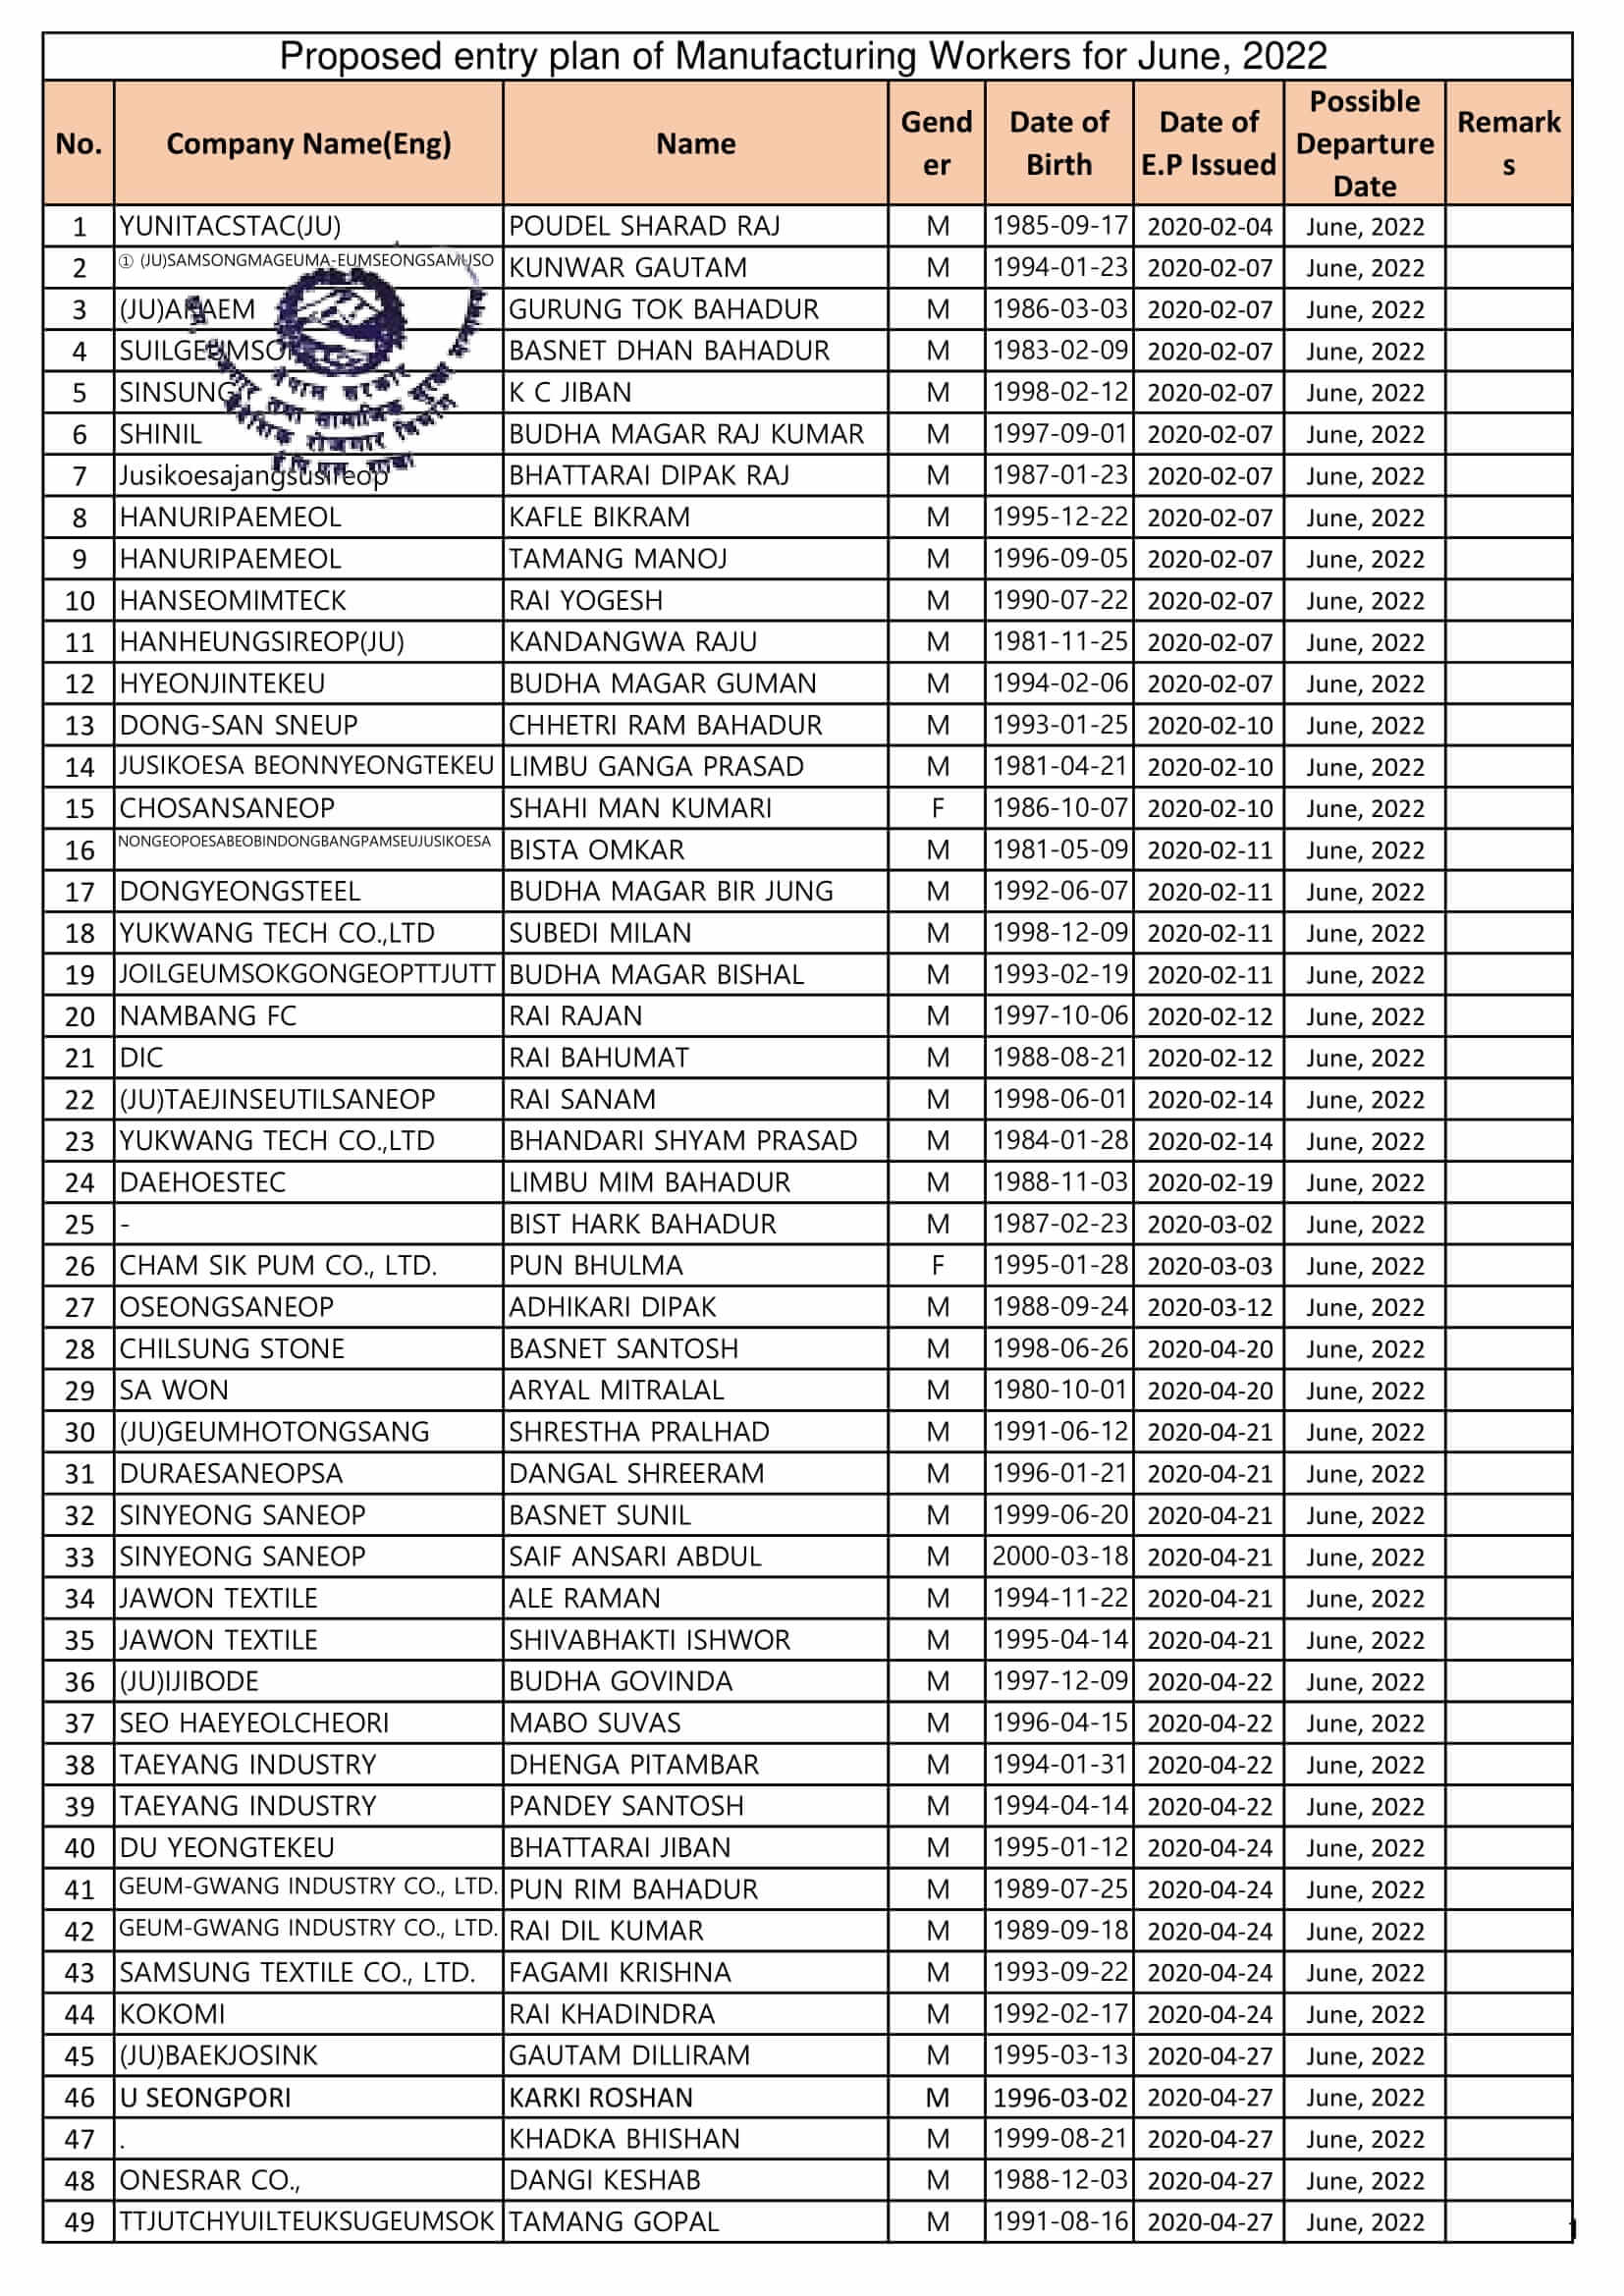 Proposed Entry list of Regular Manufacture Workers